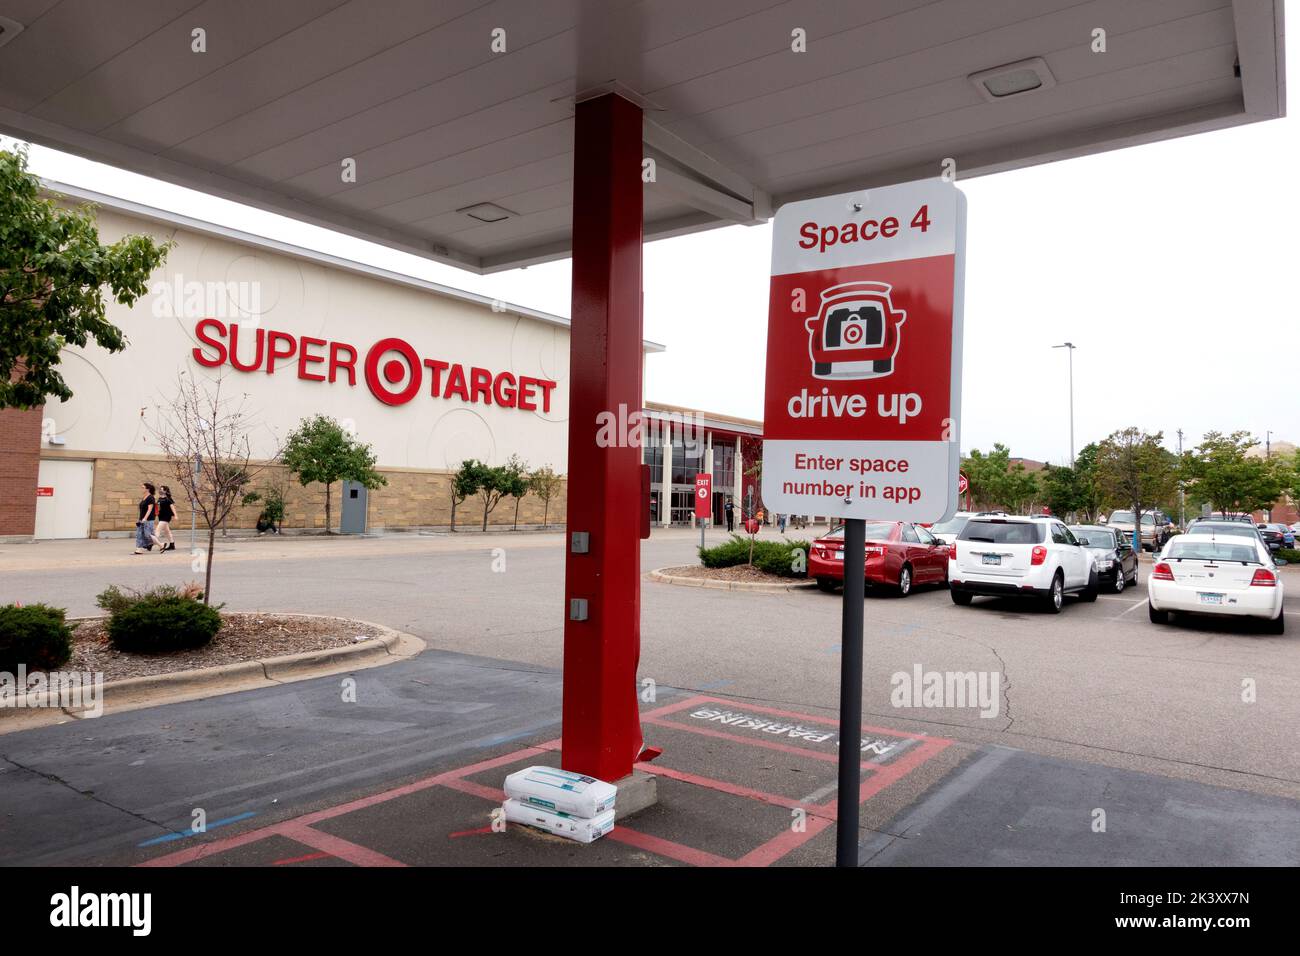 Super Target automobile pick up area to receive merchandize and groceries that were ordered on the cell phone. St Paul Minnesota MN USA Stock Photo